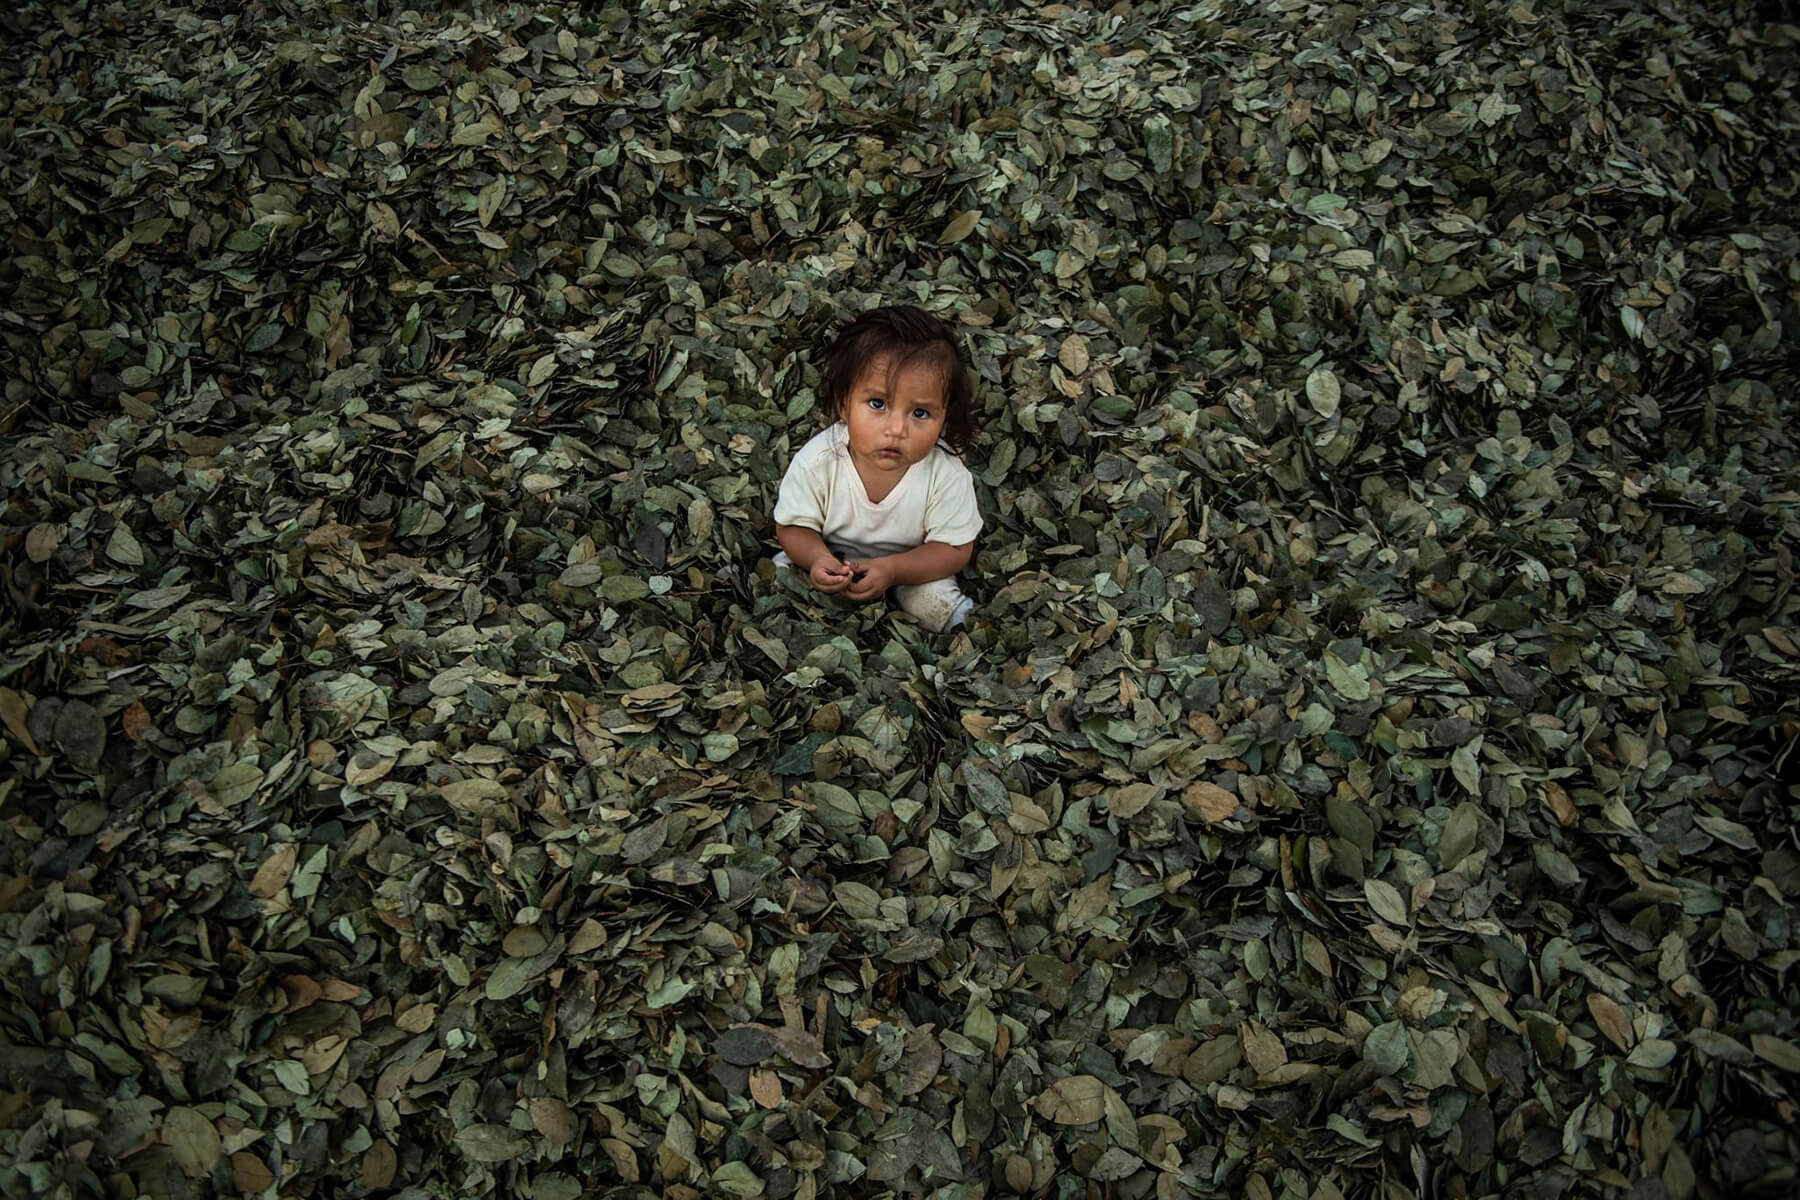 A child plays in the coca leaves in a coca-growing region in Peru known as “cocaine valley” // Photo by Ernesto Benavides / AFP via Getty Images